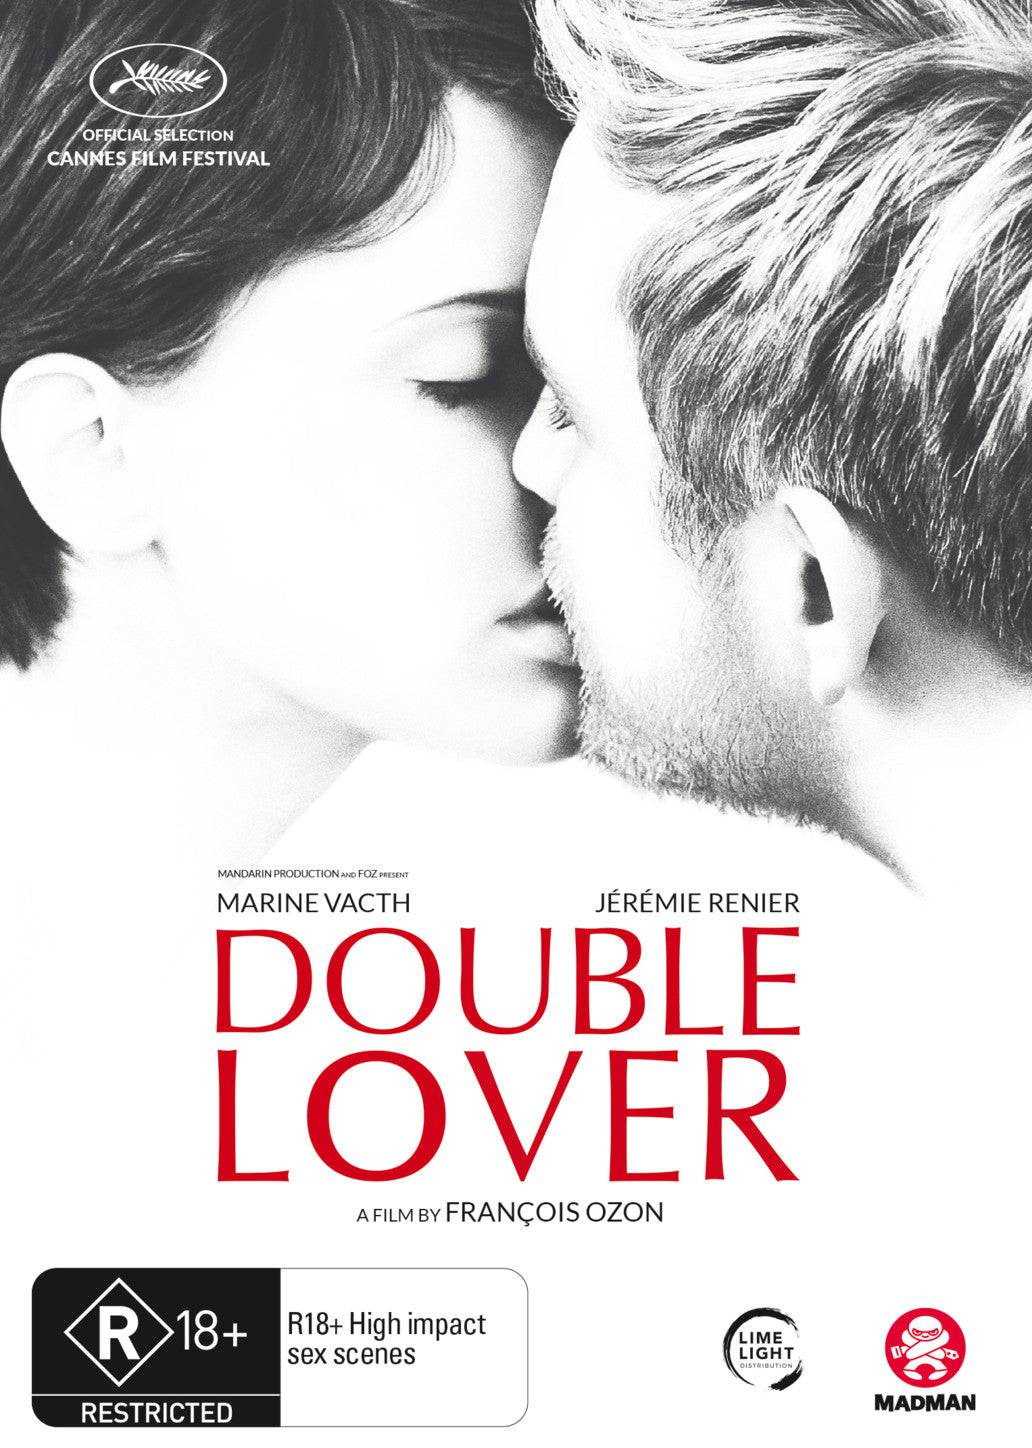 DOUBLE LOVER